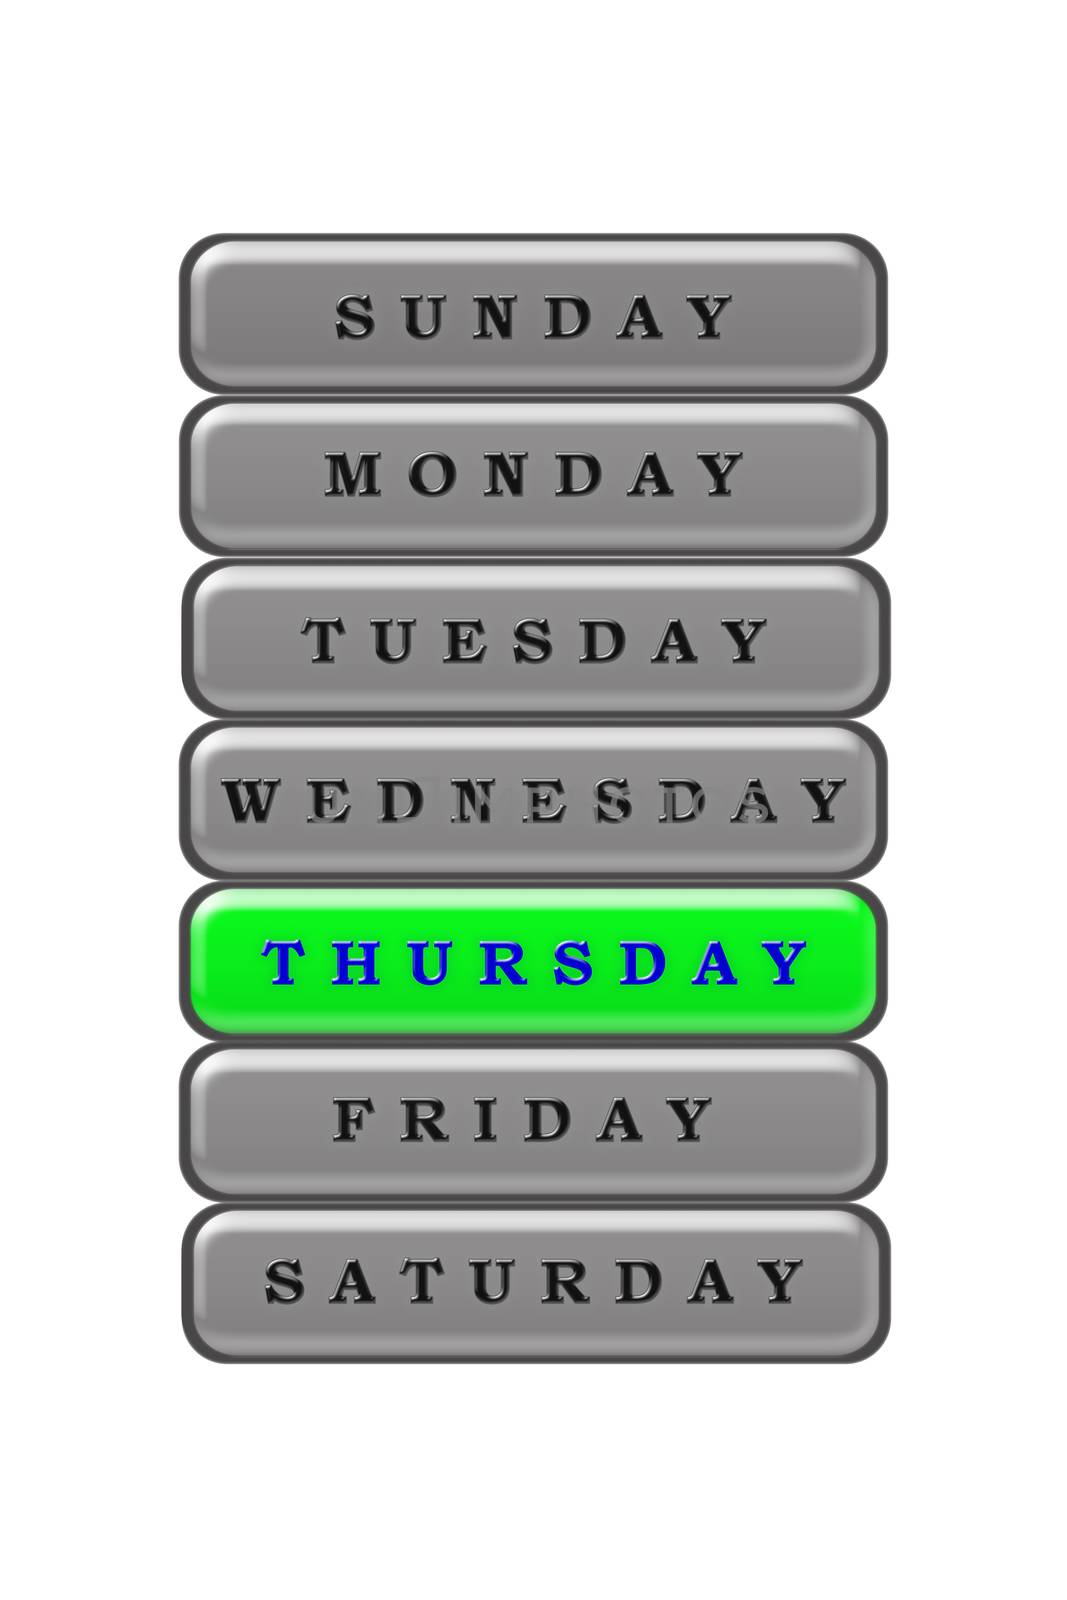 In the days of the week list, Thursday is highlighted in blue on by Grommik